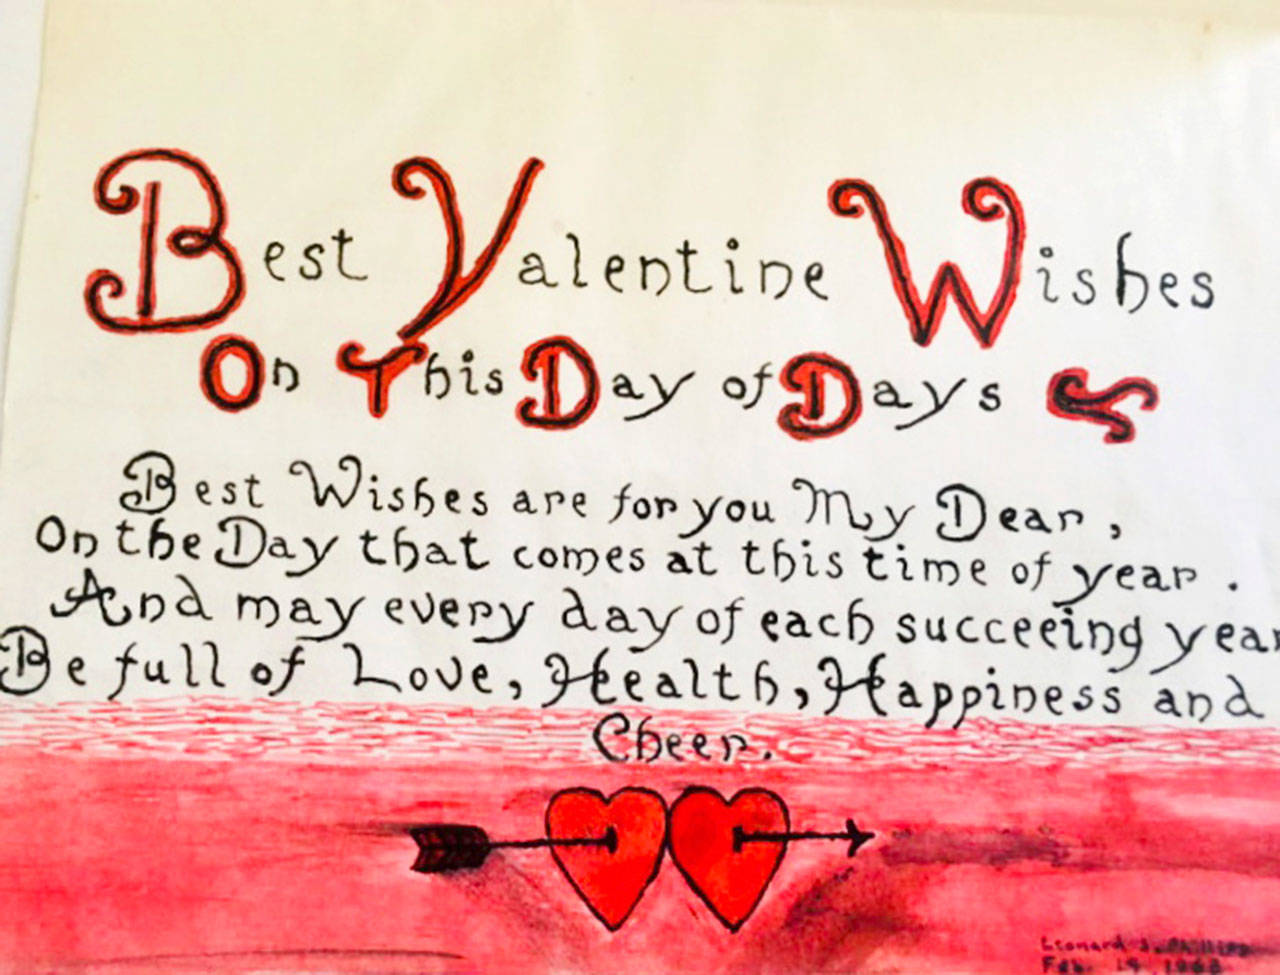 Each year, Leonard Phillips would give Merle Phillips a Valentine’s card, most of which he illustrated himself. The one above is the last one he gave her before he died in 1968 of complications from leukemia. | Stefano Esposito/Sun-Times